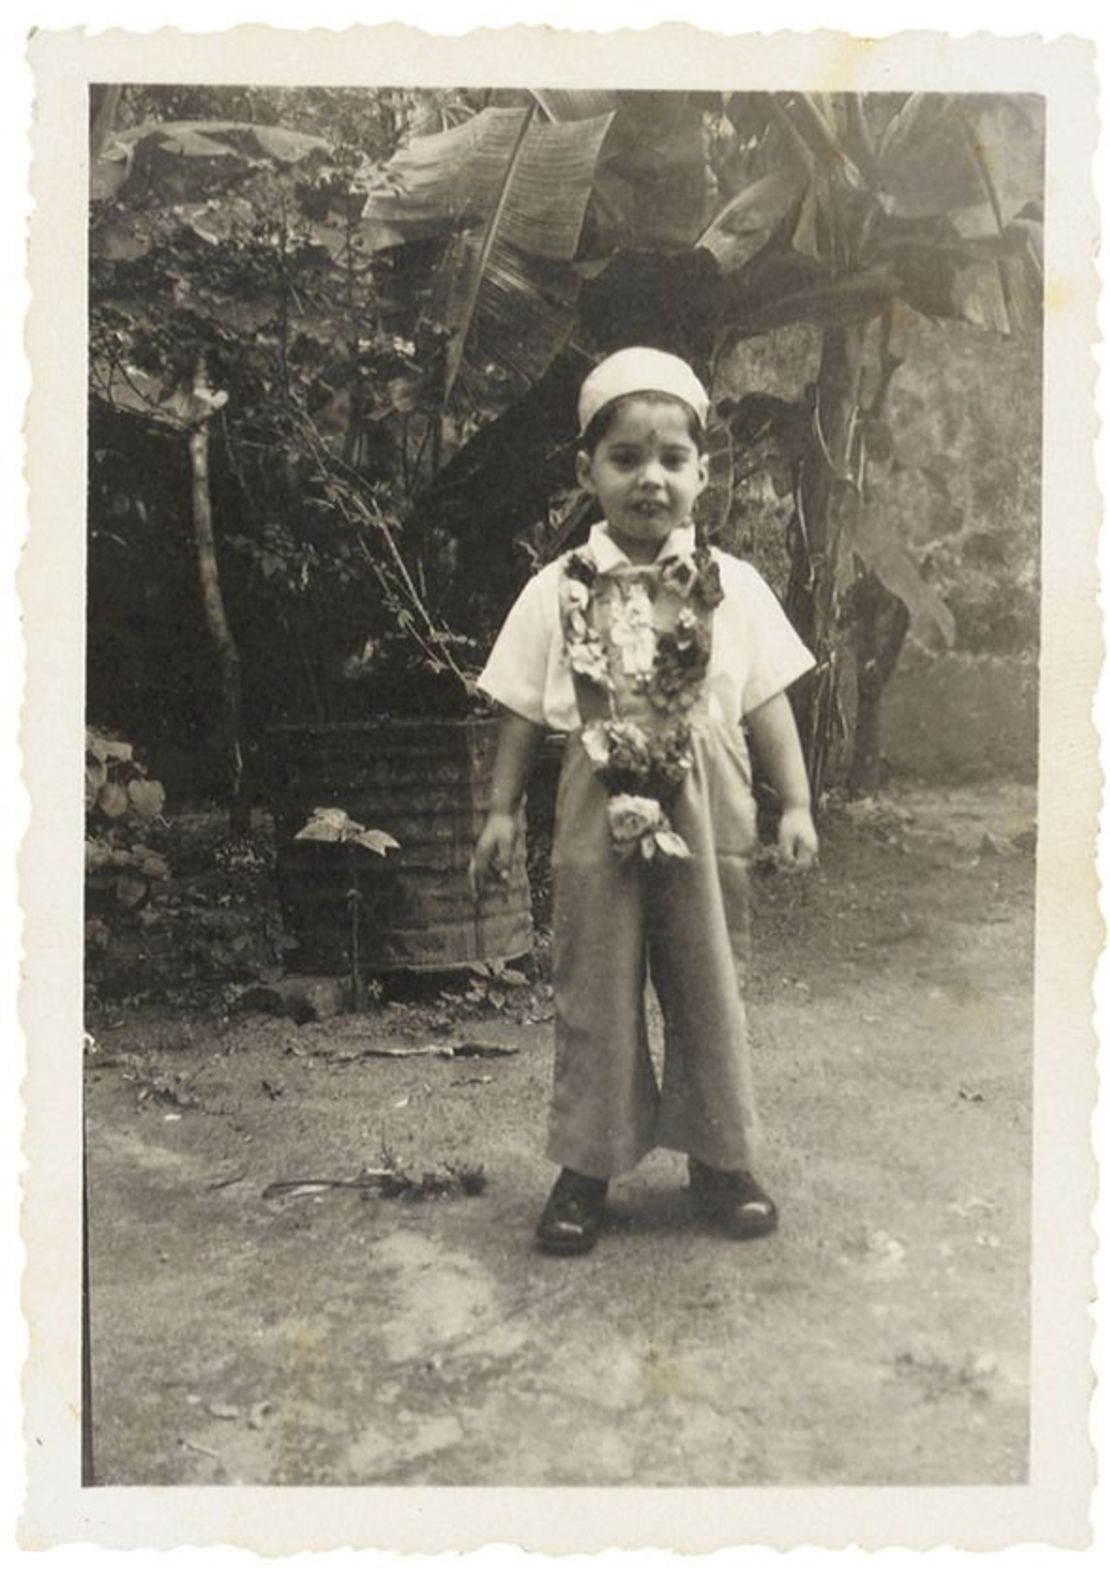 This photo, showing Freddie Mercury on his 4th birthday in Zanzibar, is one of the rare childhood pictures on display in the museum.